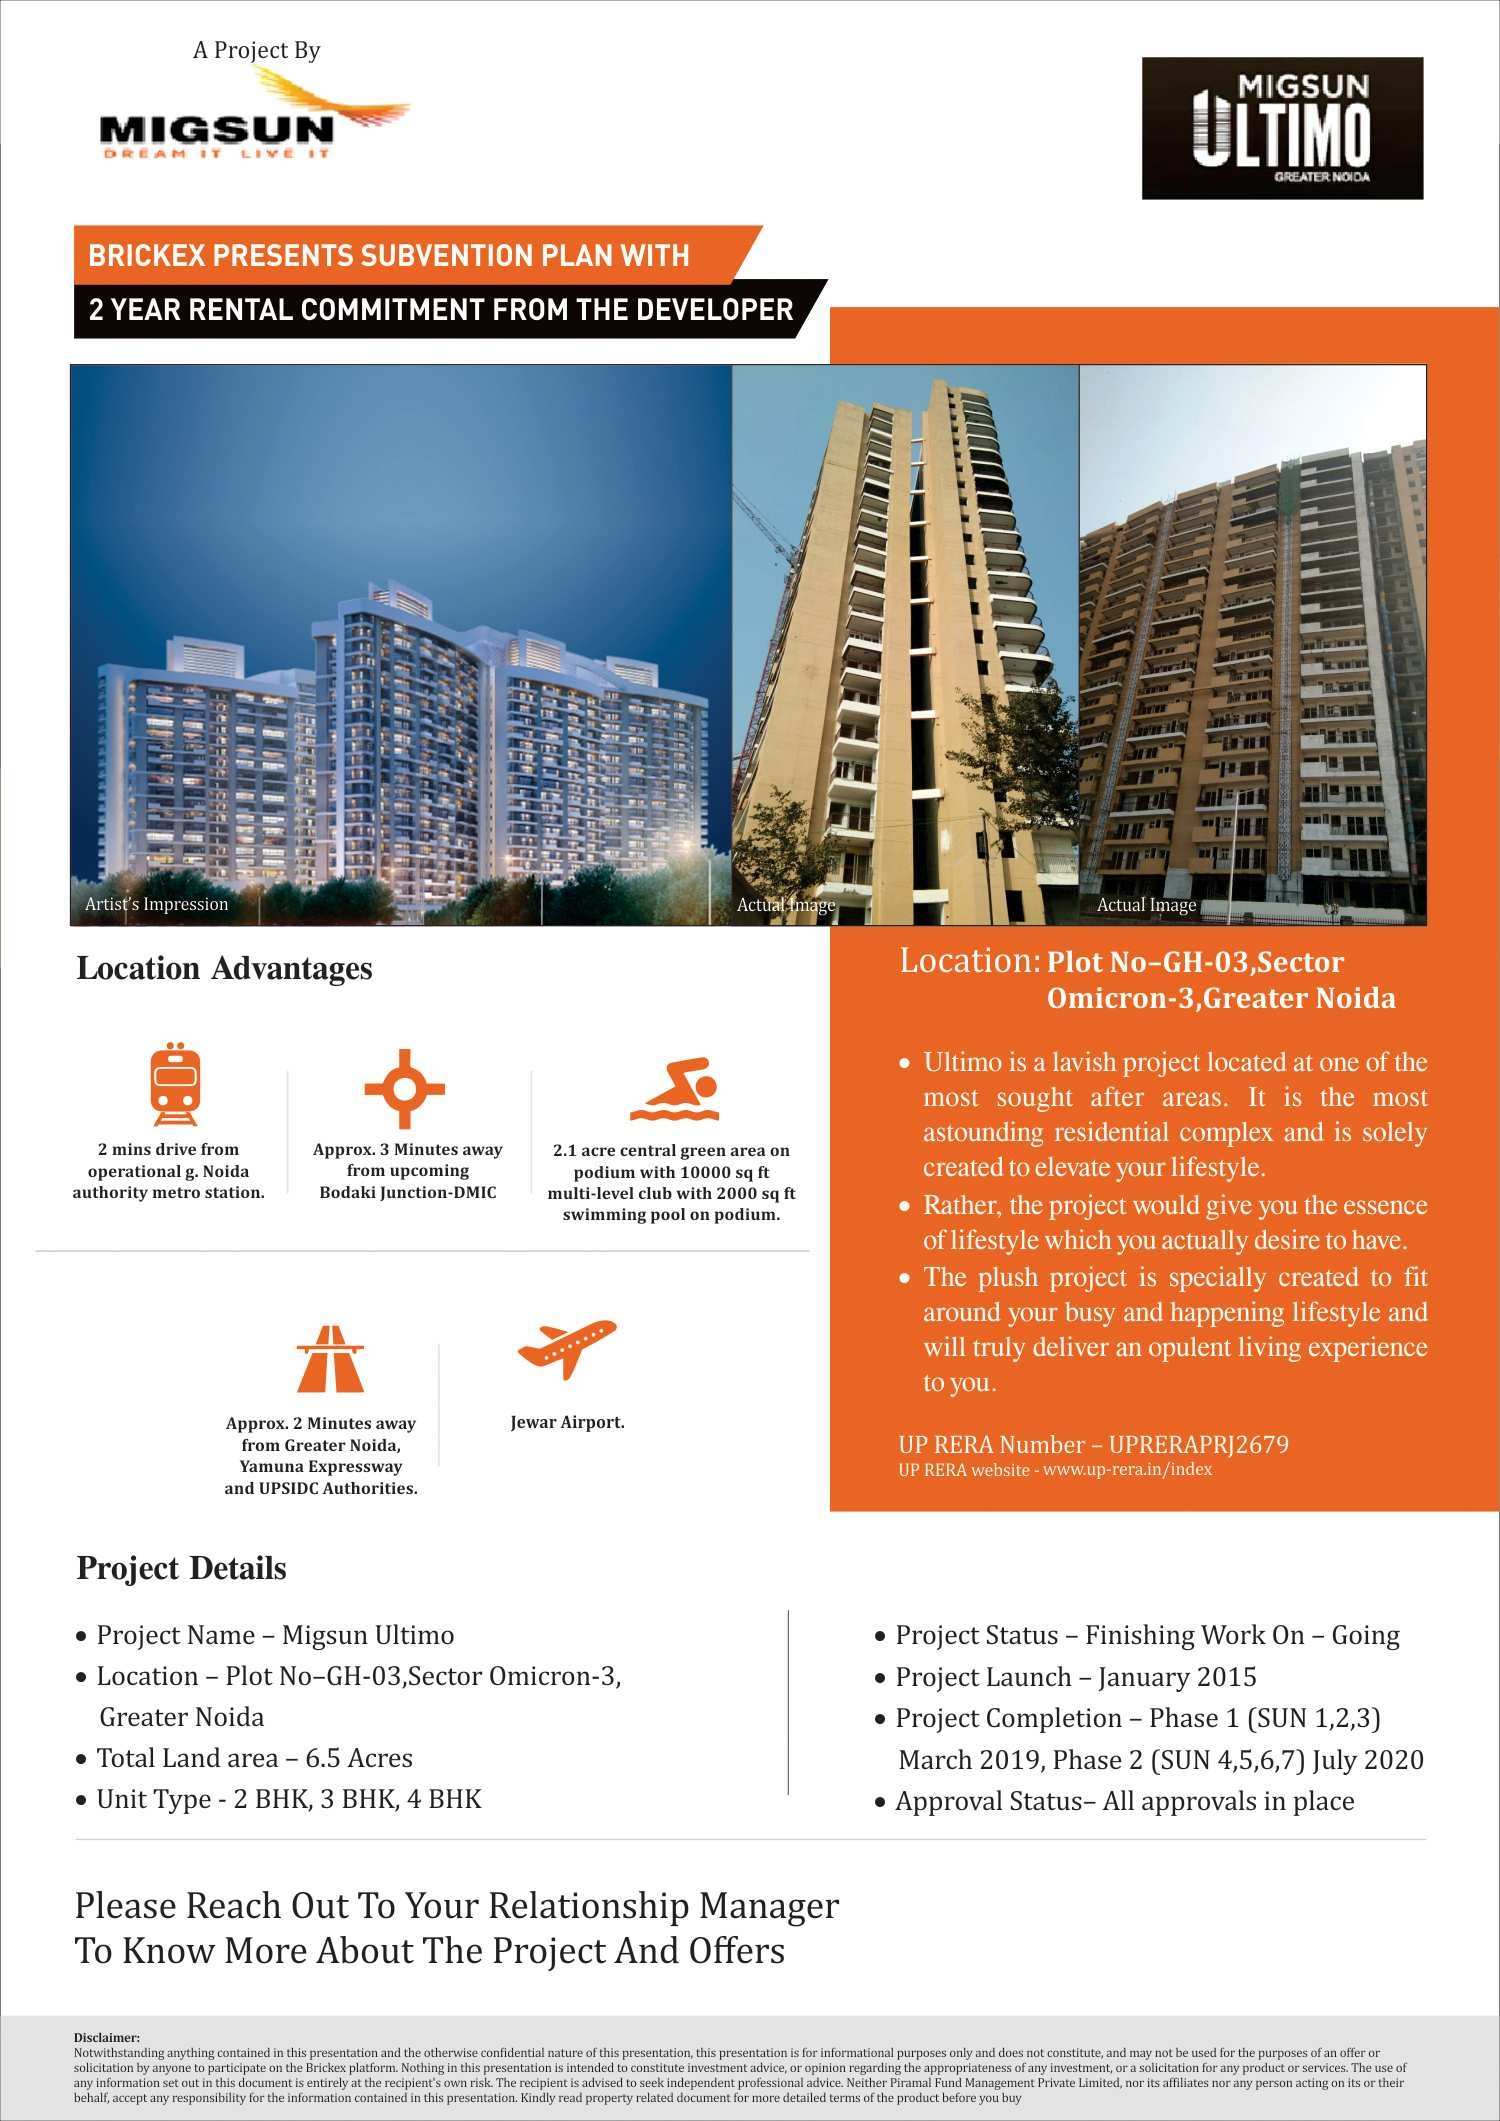 Migsun Ultimo offers Subvention plan with 2 Year Rental Commitment in Greater Noida Update